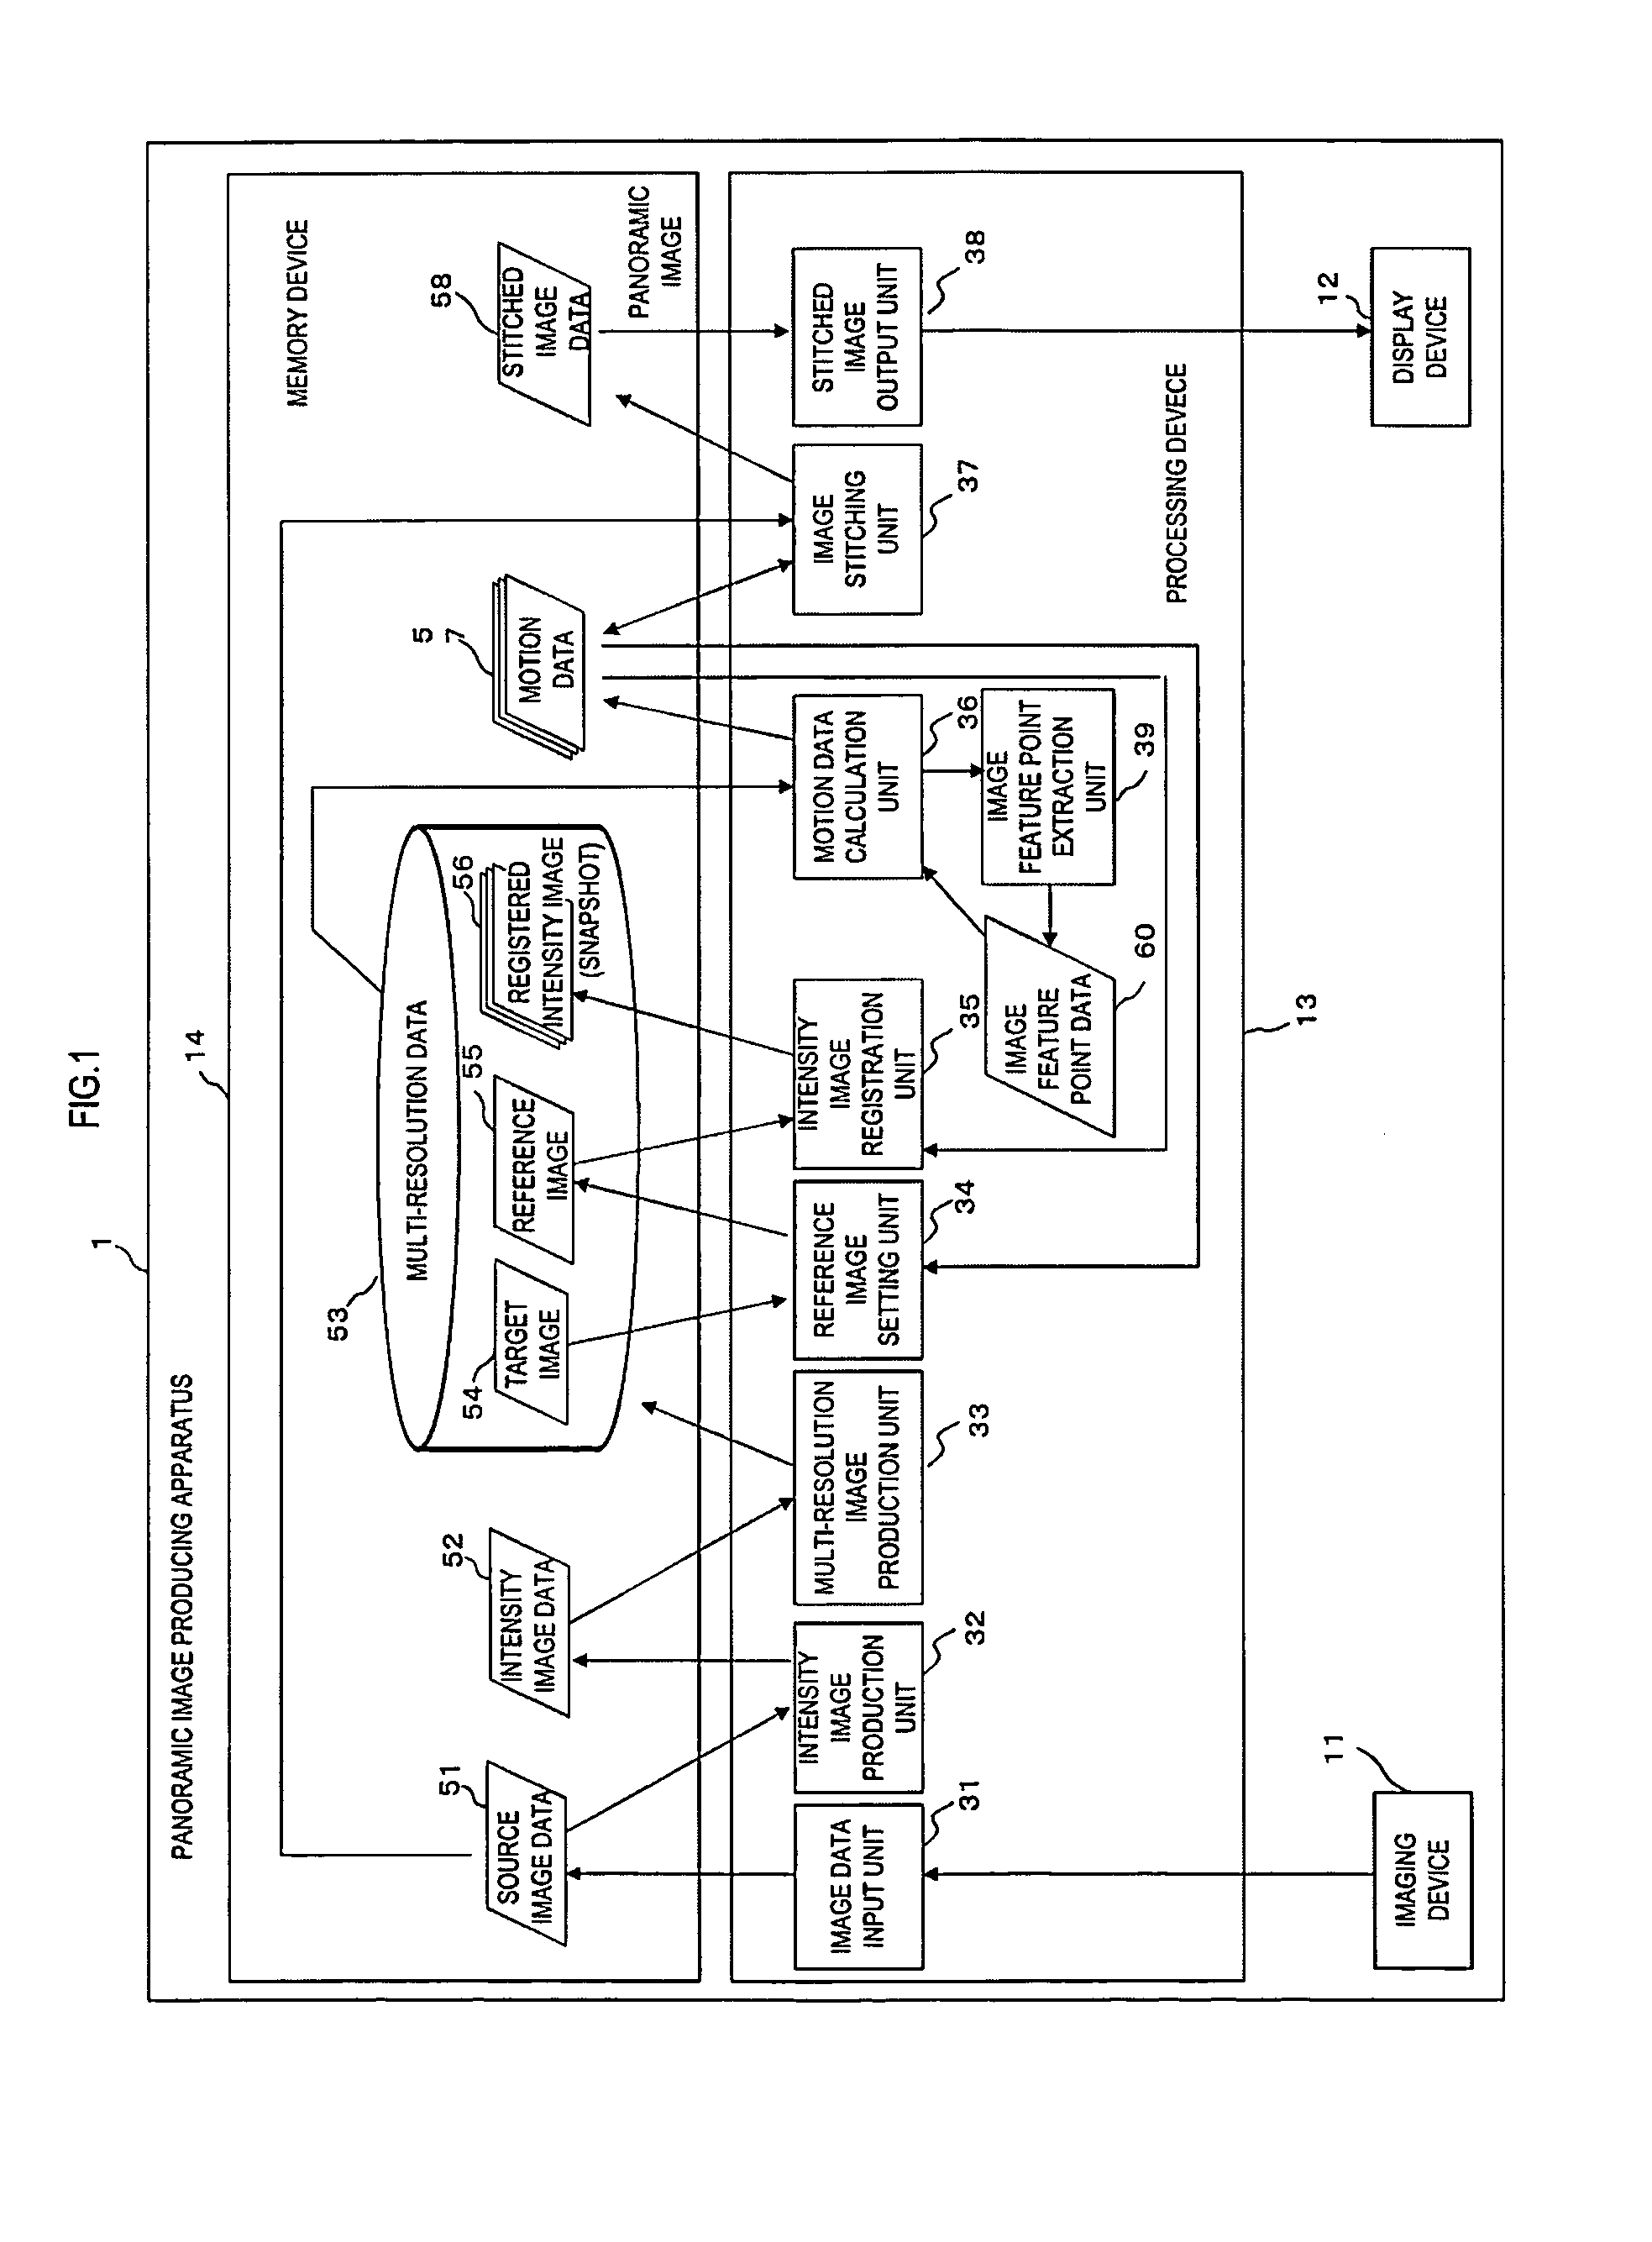 Apparatus and program for producing a panoramic image